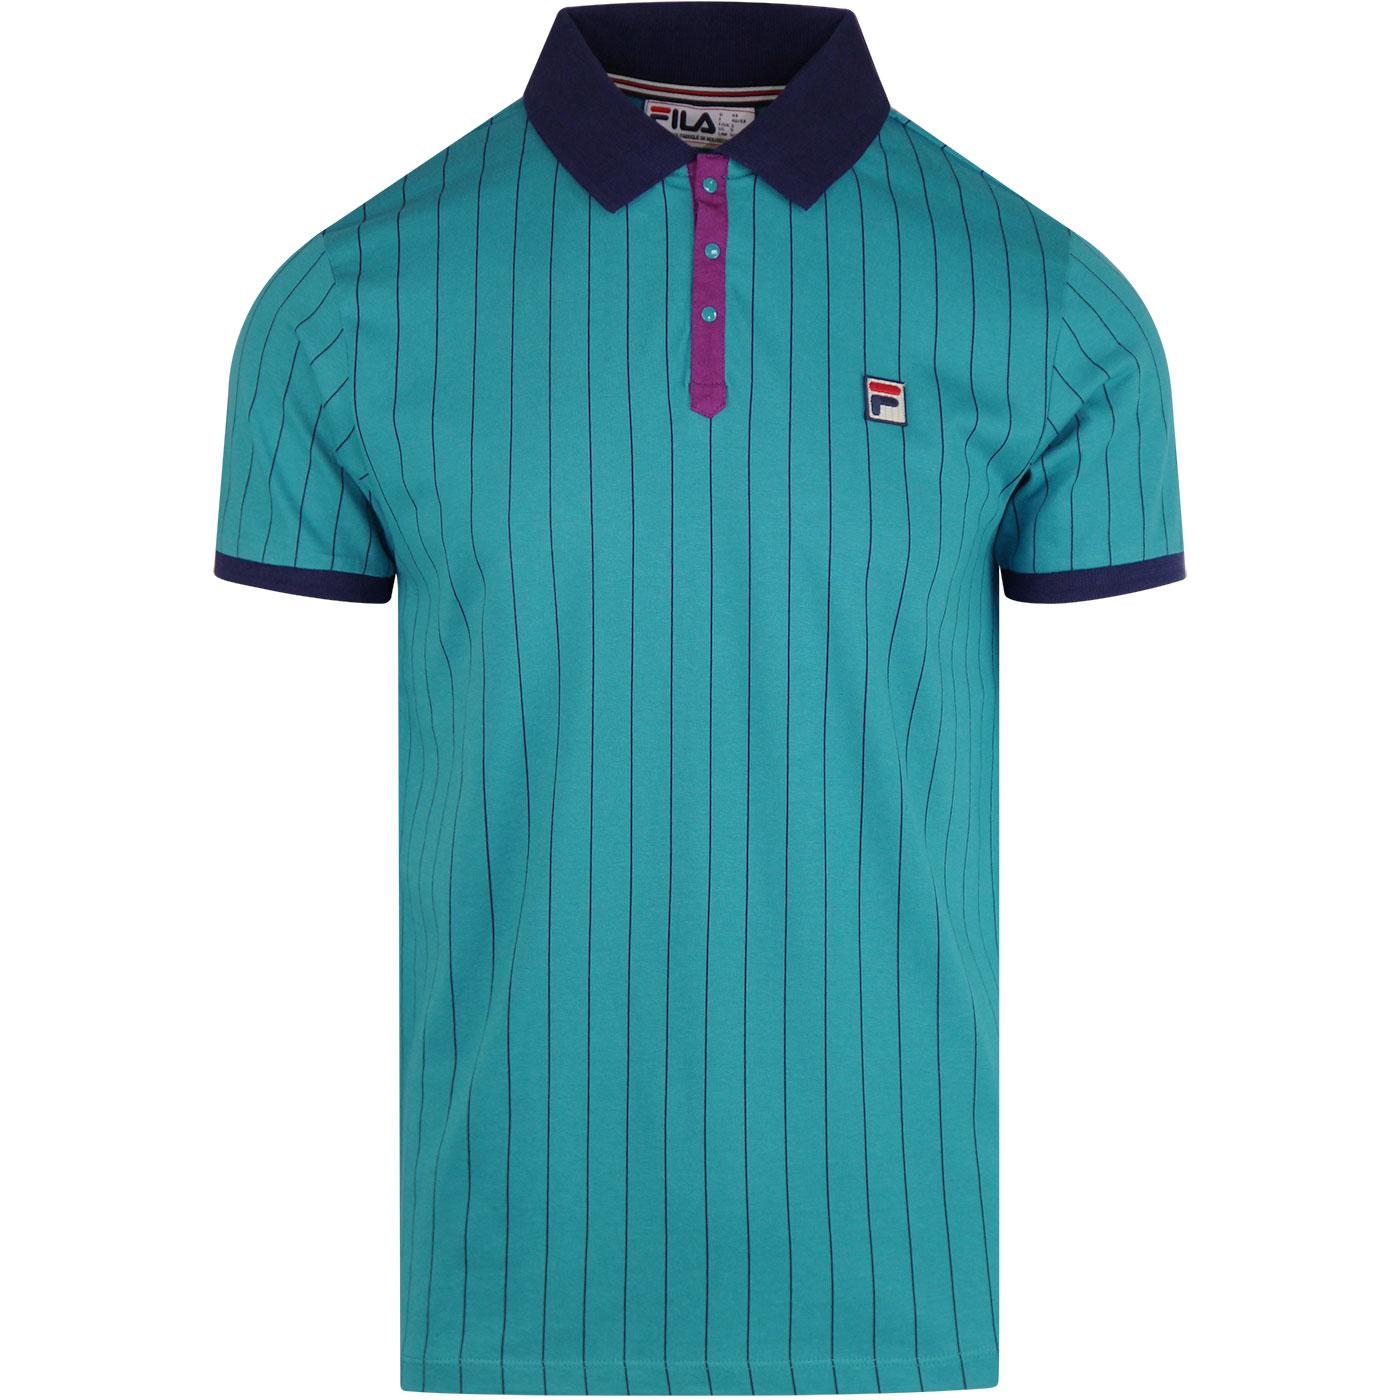 FILA VINTAGE BB1 Retro 70s Tennis Polo Shirt in Biscay Bay